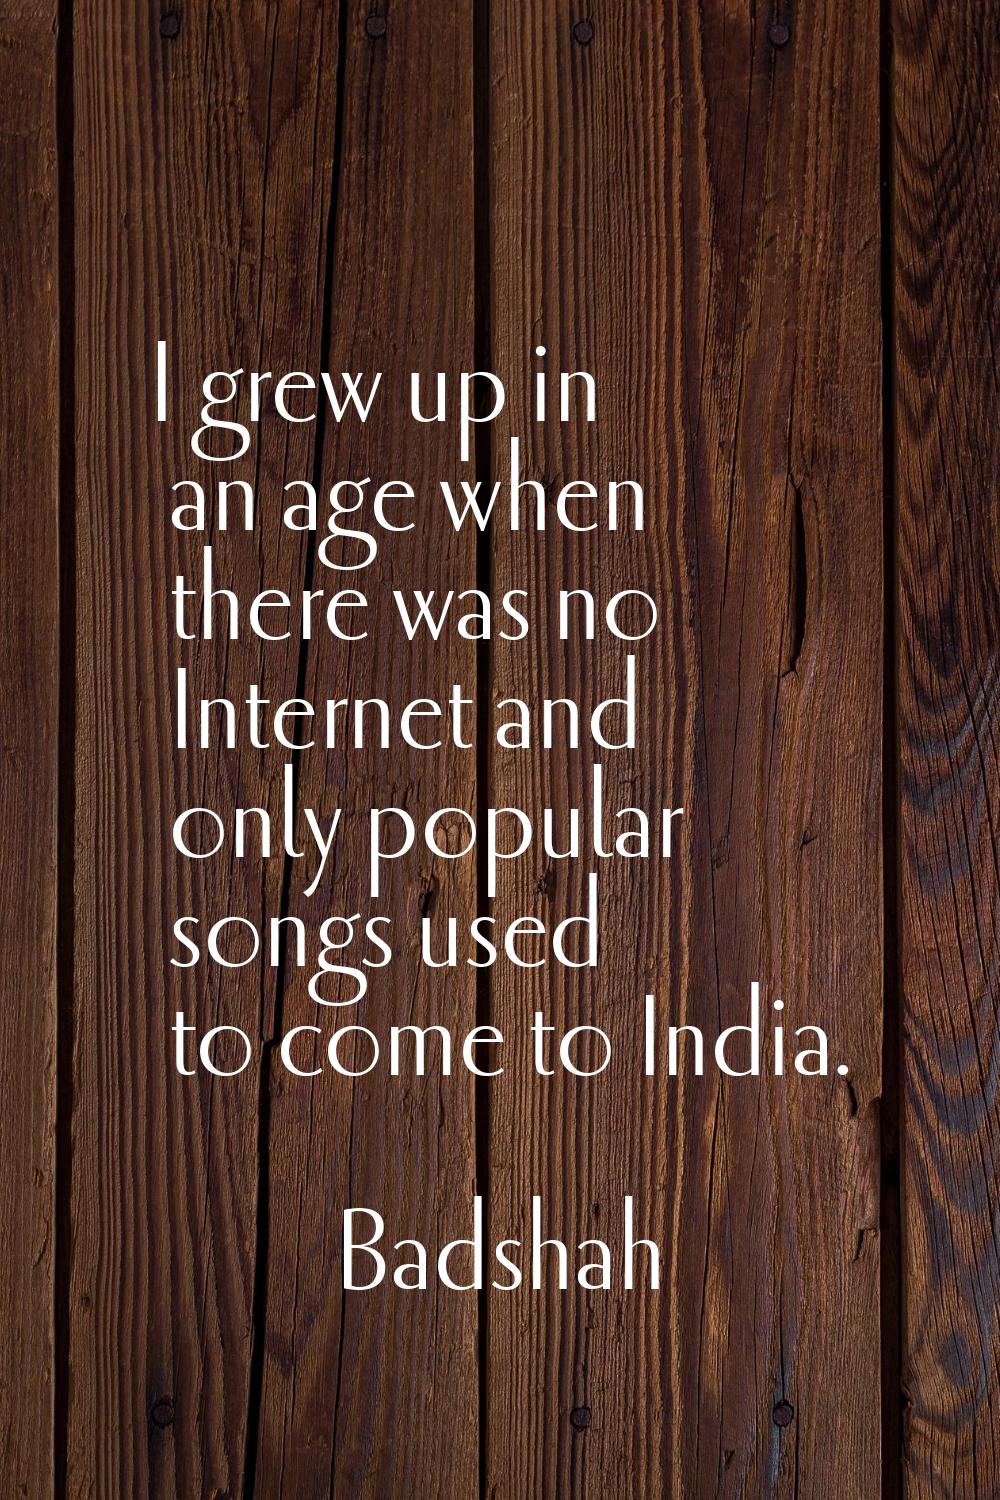 I grew up in an age when there was no Internet and only popular songs used to come to India.